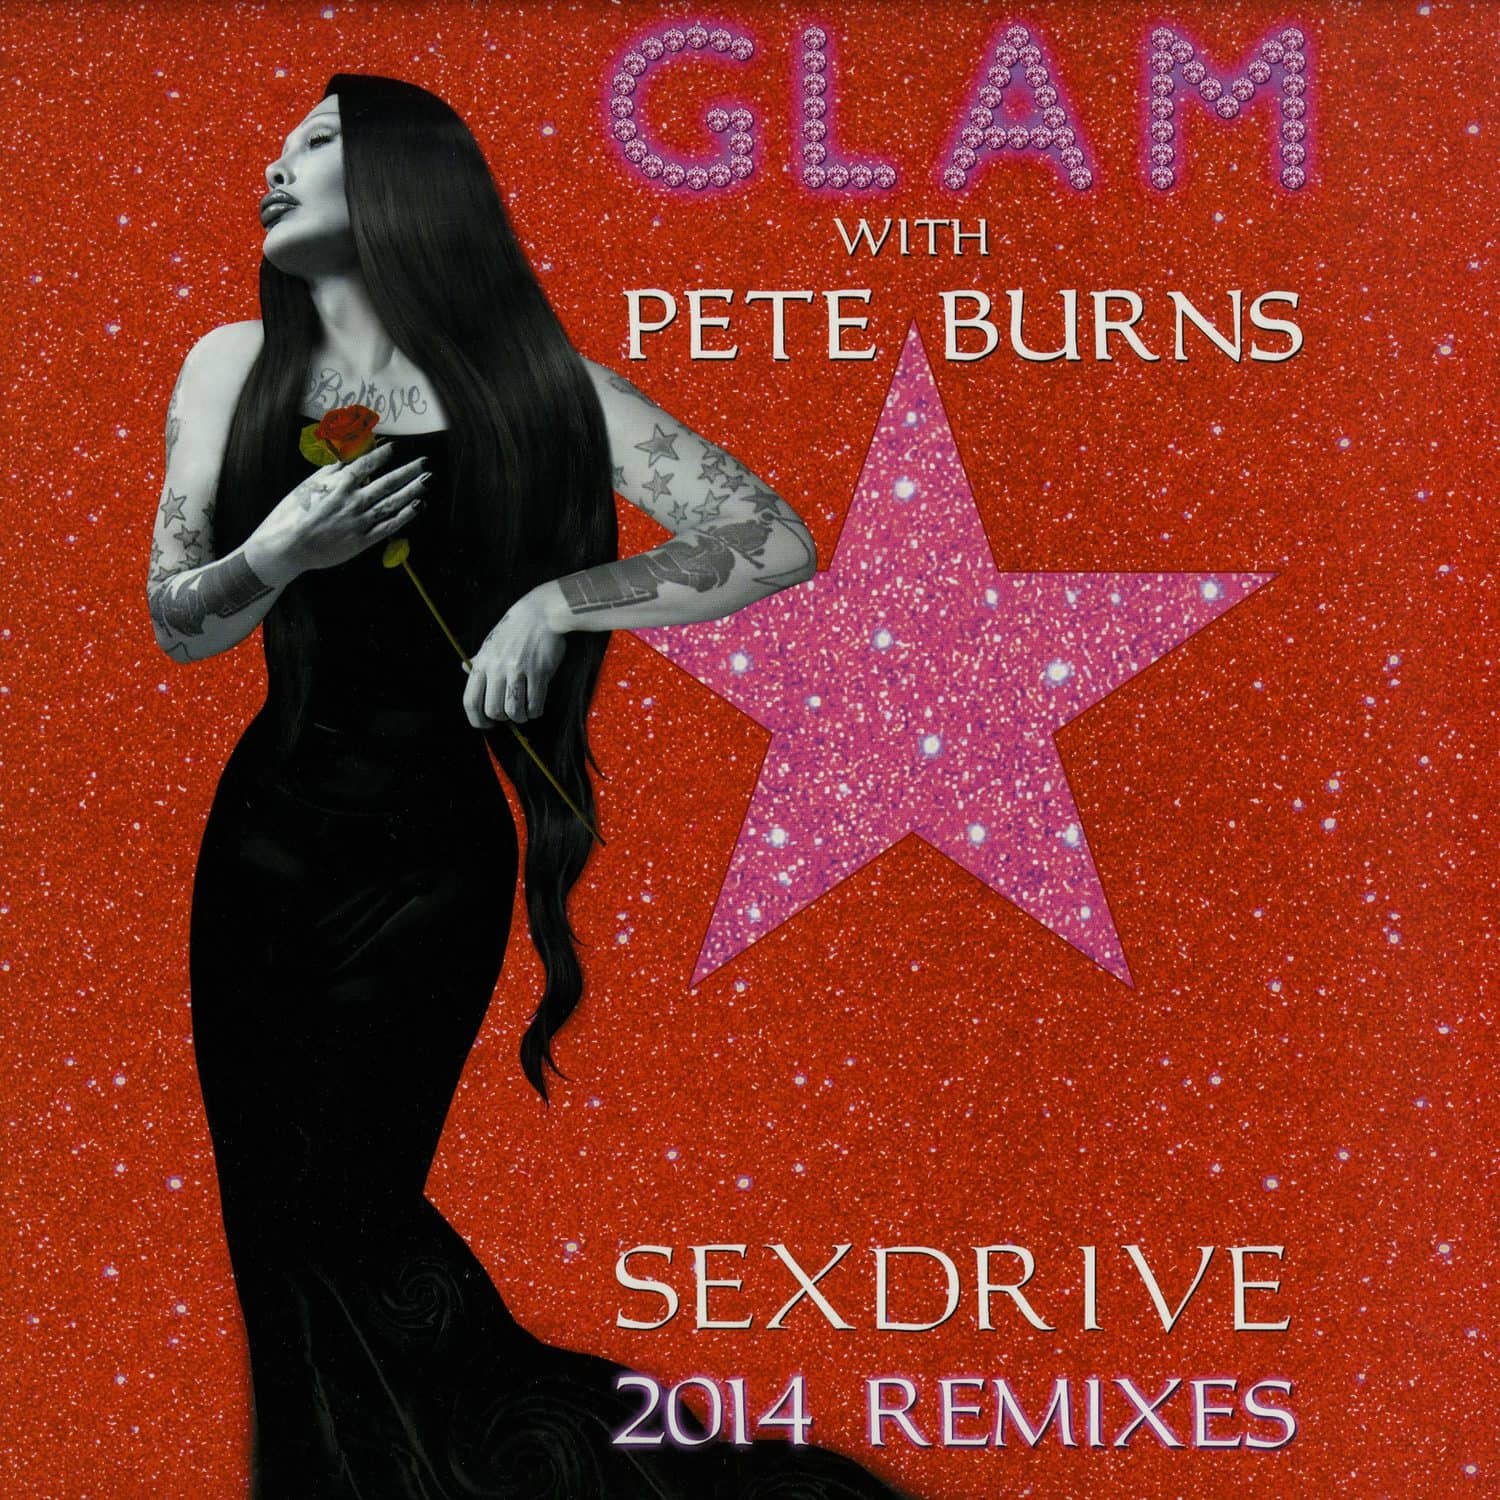 Glam With Pete Burns - SEX DRIVE 2014 REMIXES